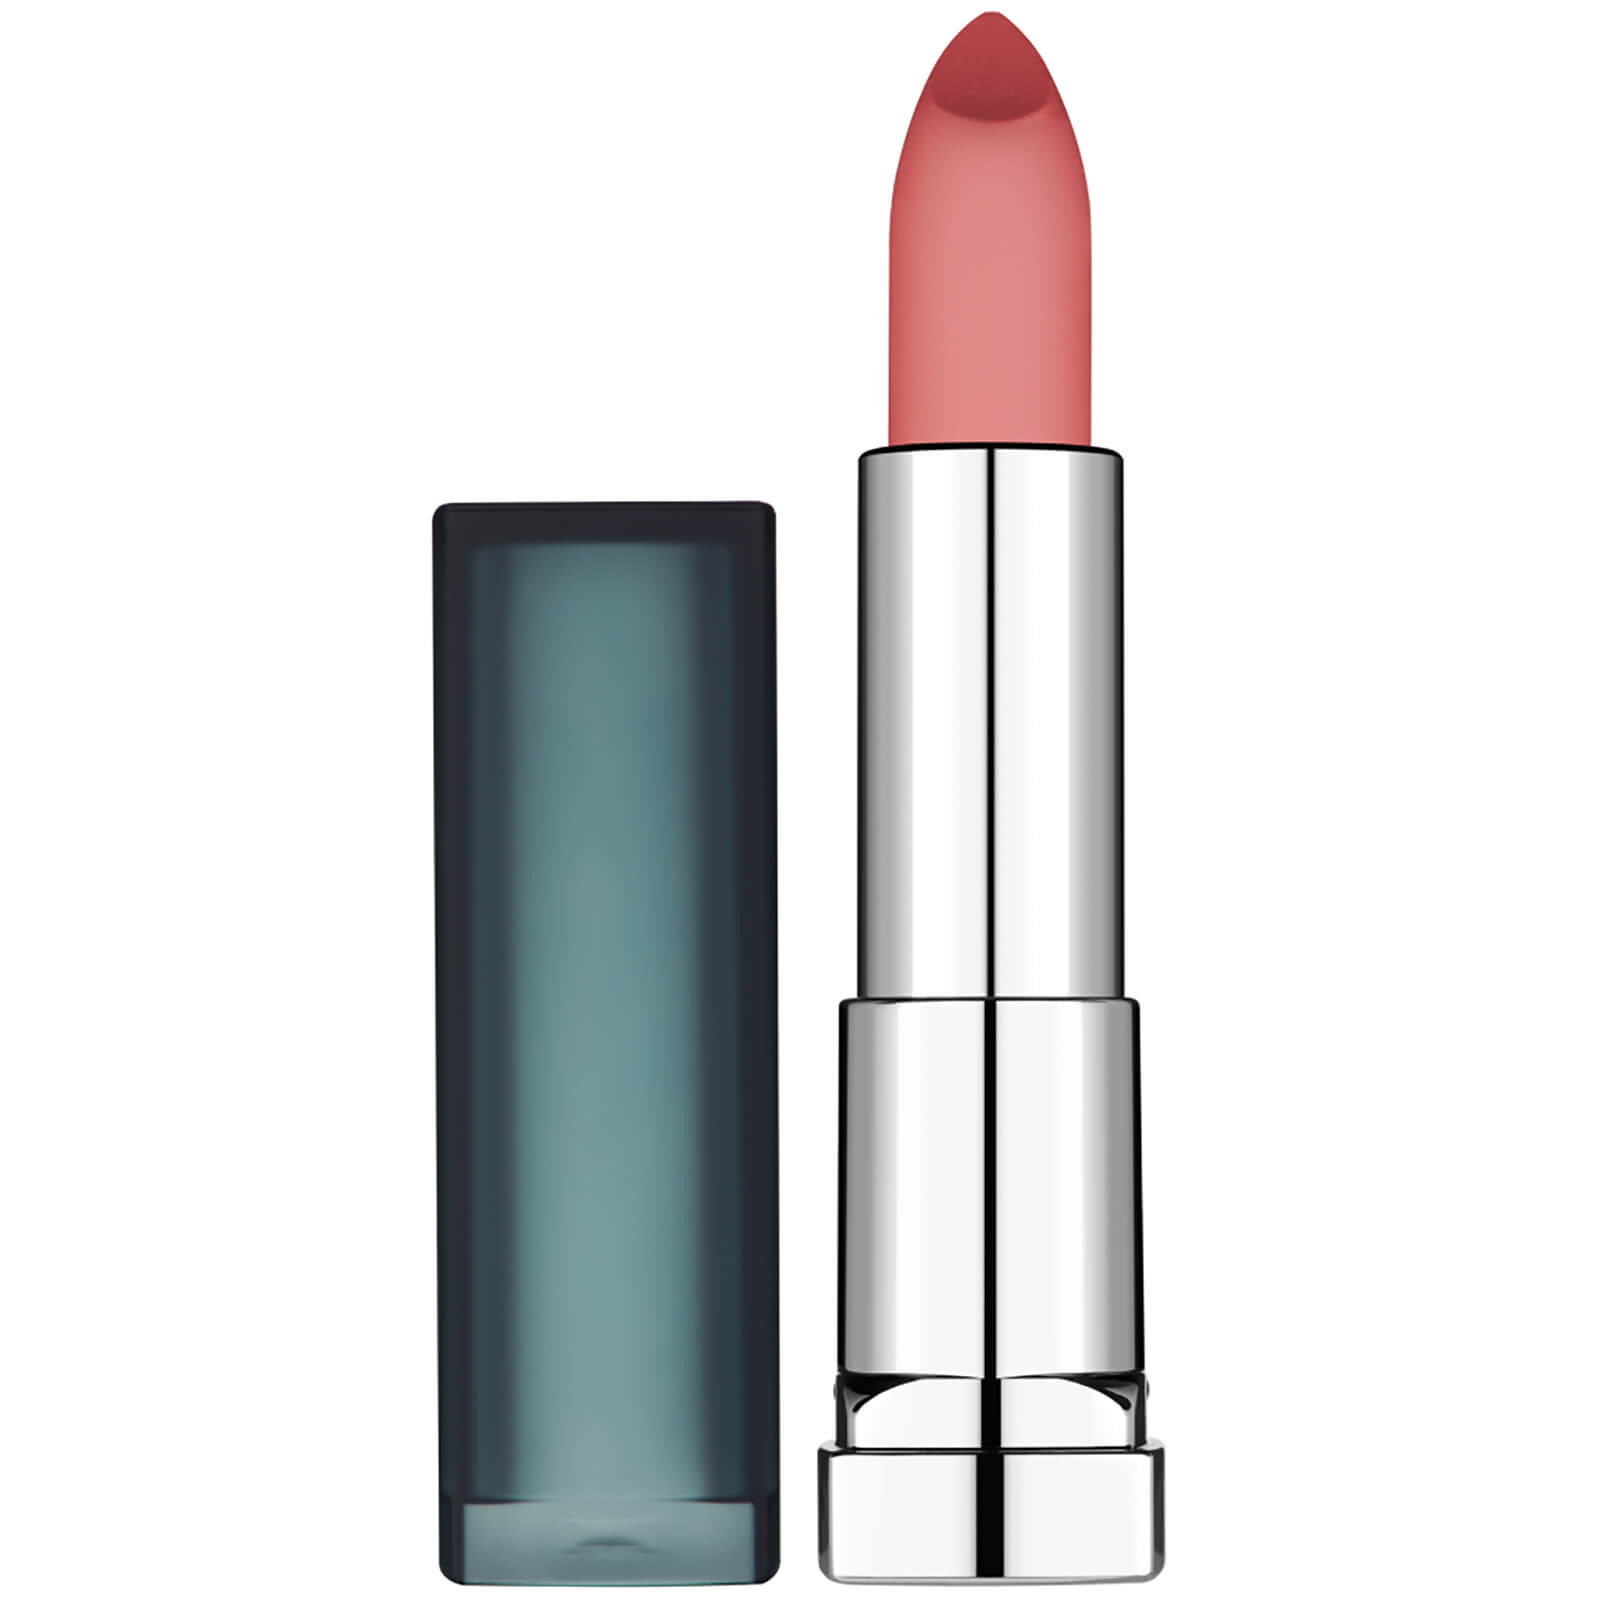 Image of Maybelline Color Sensational Lipstick Matte Nude (Various Shades) - Smoky Rose